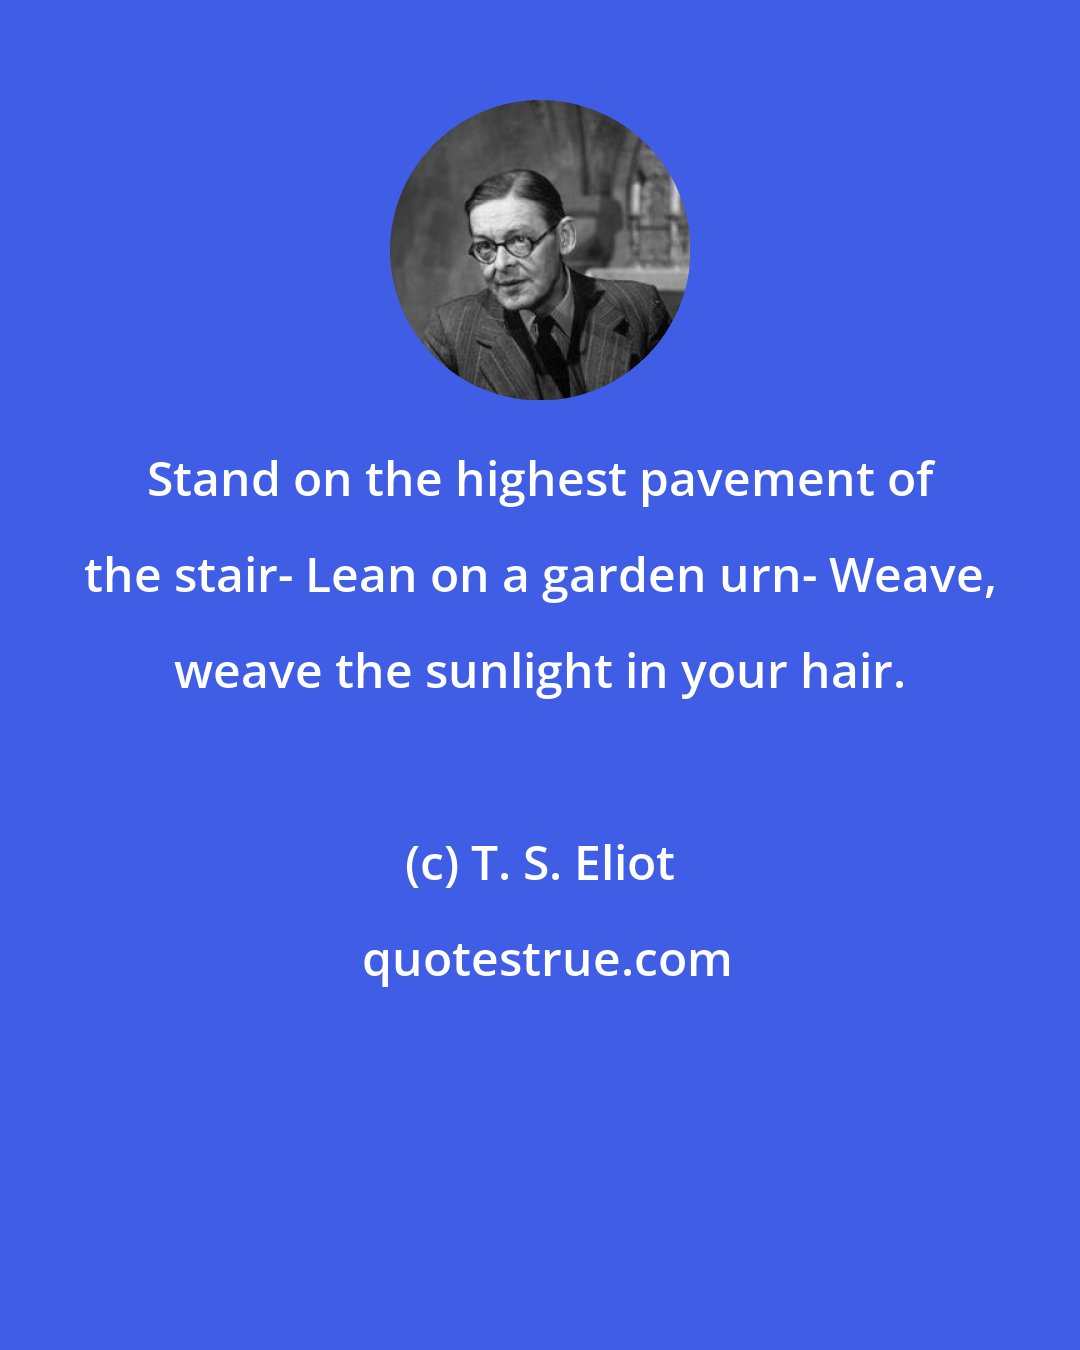 T. S. Eliot: Stand on the highest pavement of the stair- Lean on a garden urn- Weave, weave the sunlight in your hair.